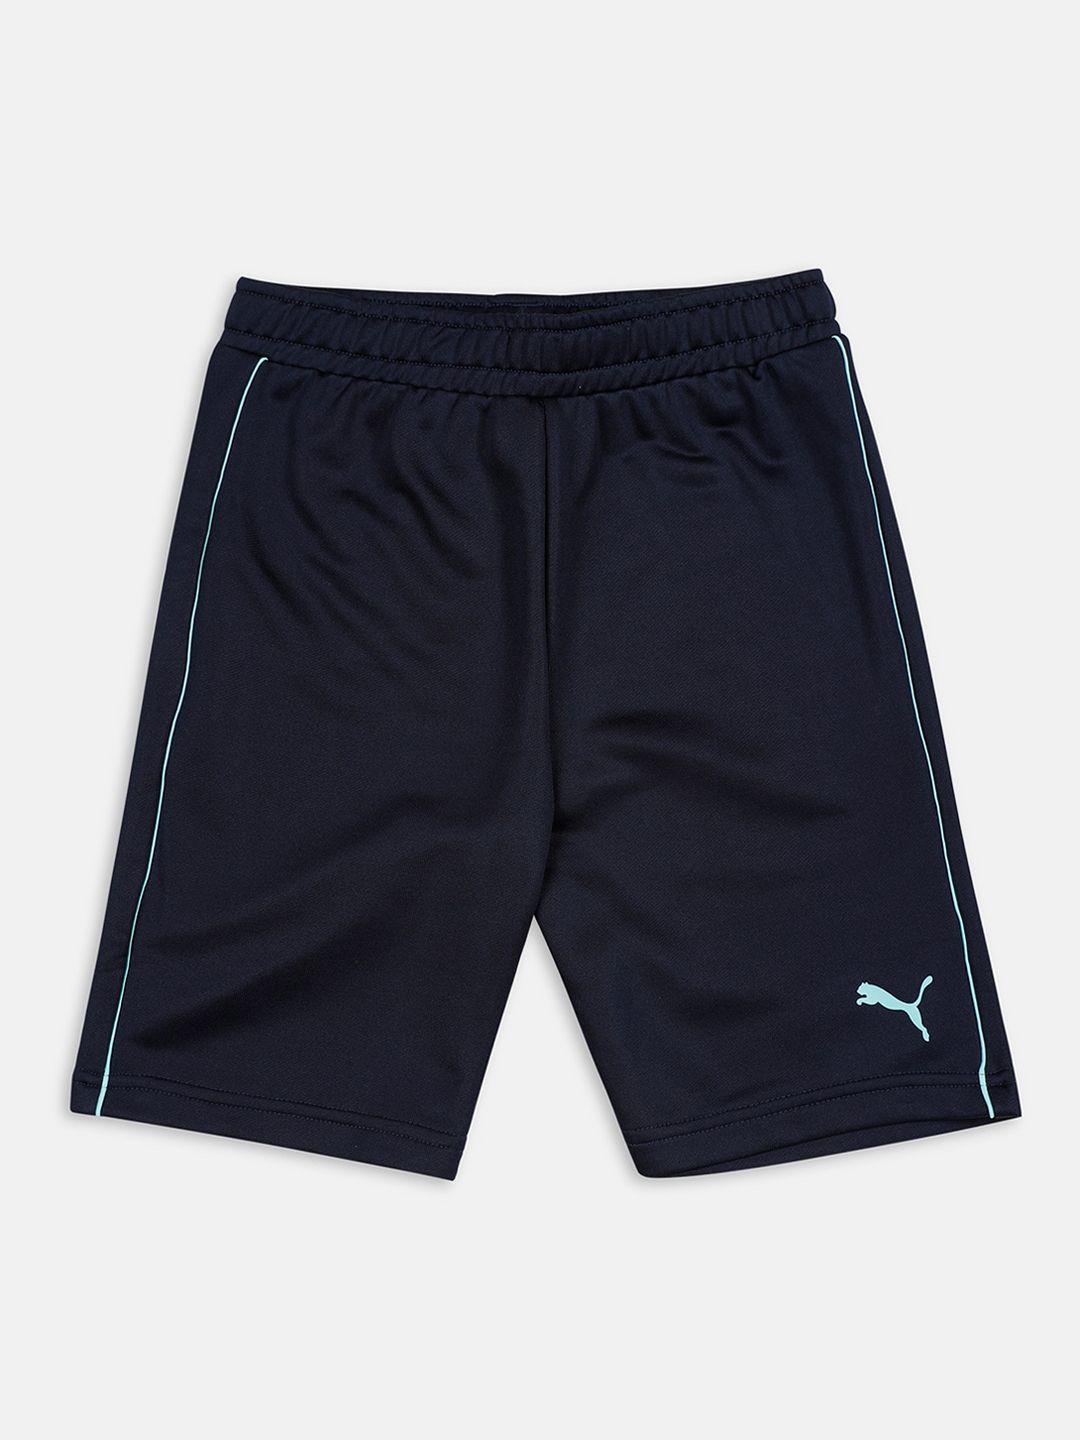 puma-boys-cricket-solid-youth-knitted-sports-shorts